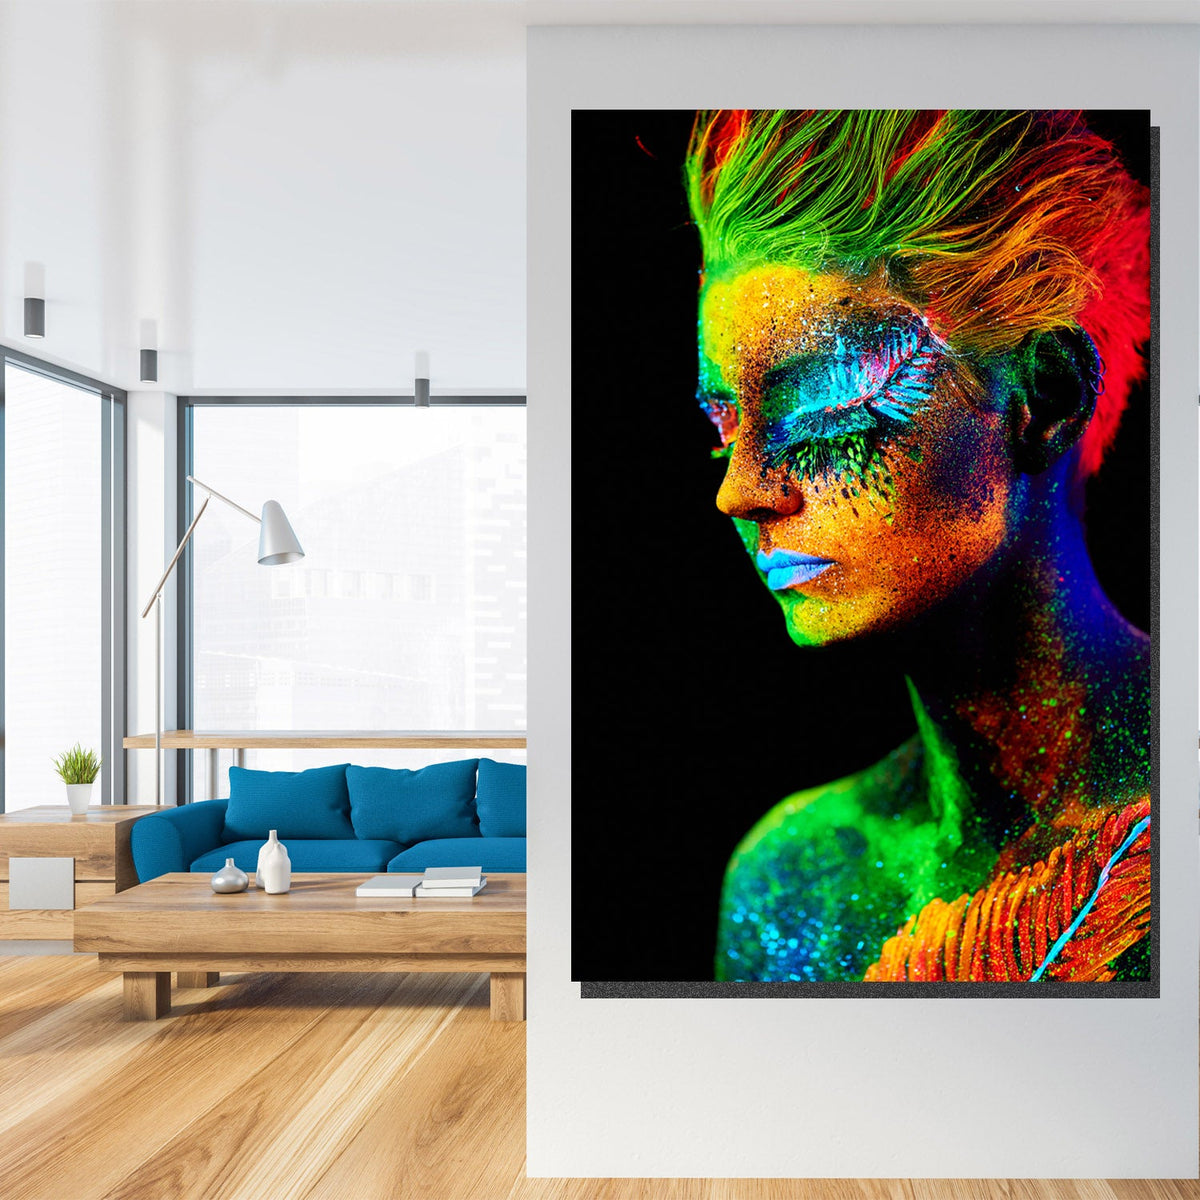 https://cdn.shopify.com/s/files/1/0387/9986/8044/products/ColoursofaWomanCanvasArtprintStretched-4.jpg